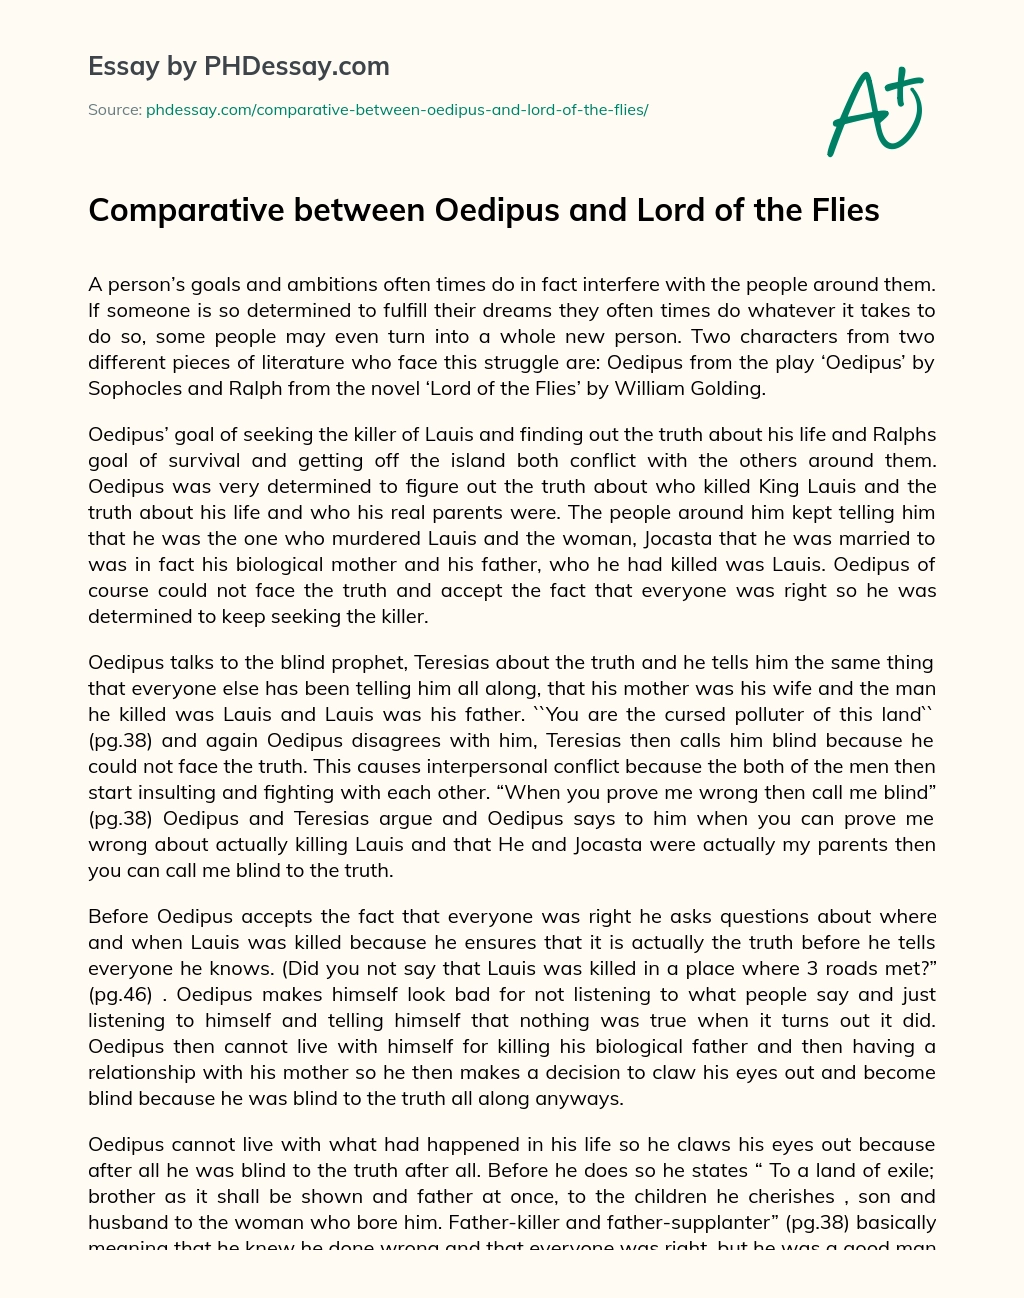 Comparative between Oedipus and Lord of the Flies essay